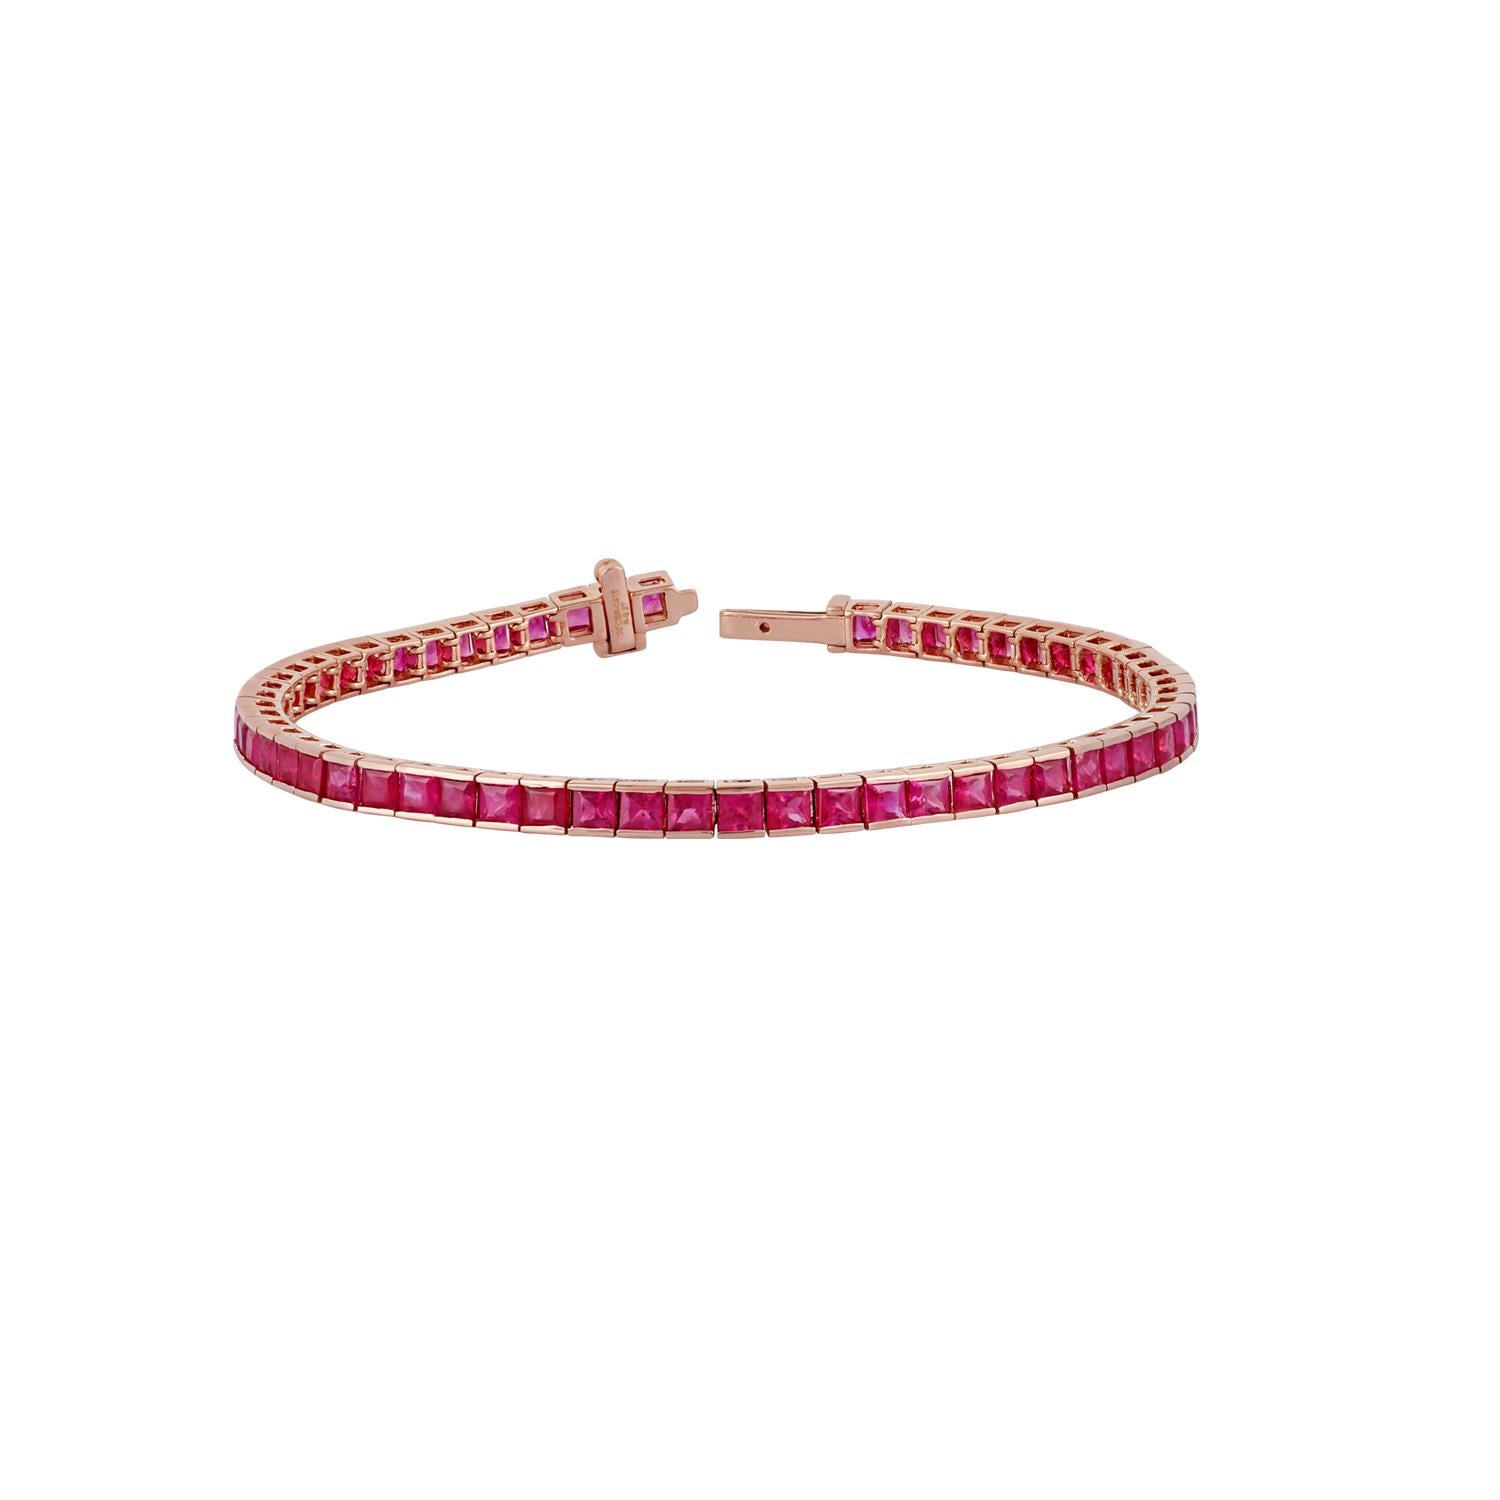 This is an elegant ruby bracelet features 58 pieces of princess cut rubies 9.27 carat in the channel setting, this bracelet entirely made in 18 karat rose gold weight 10.85 grams, this is a classic tennis bracelet.